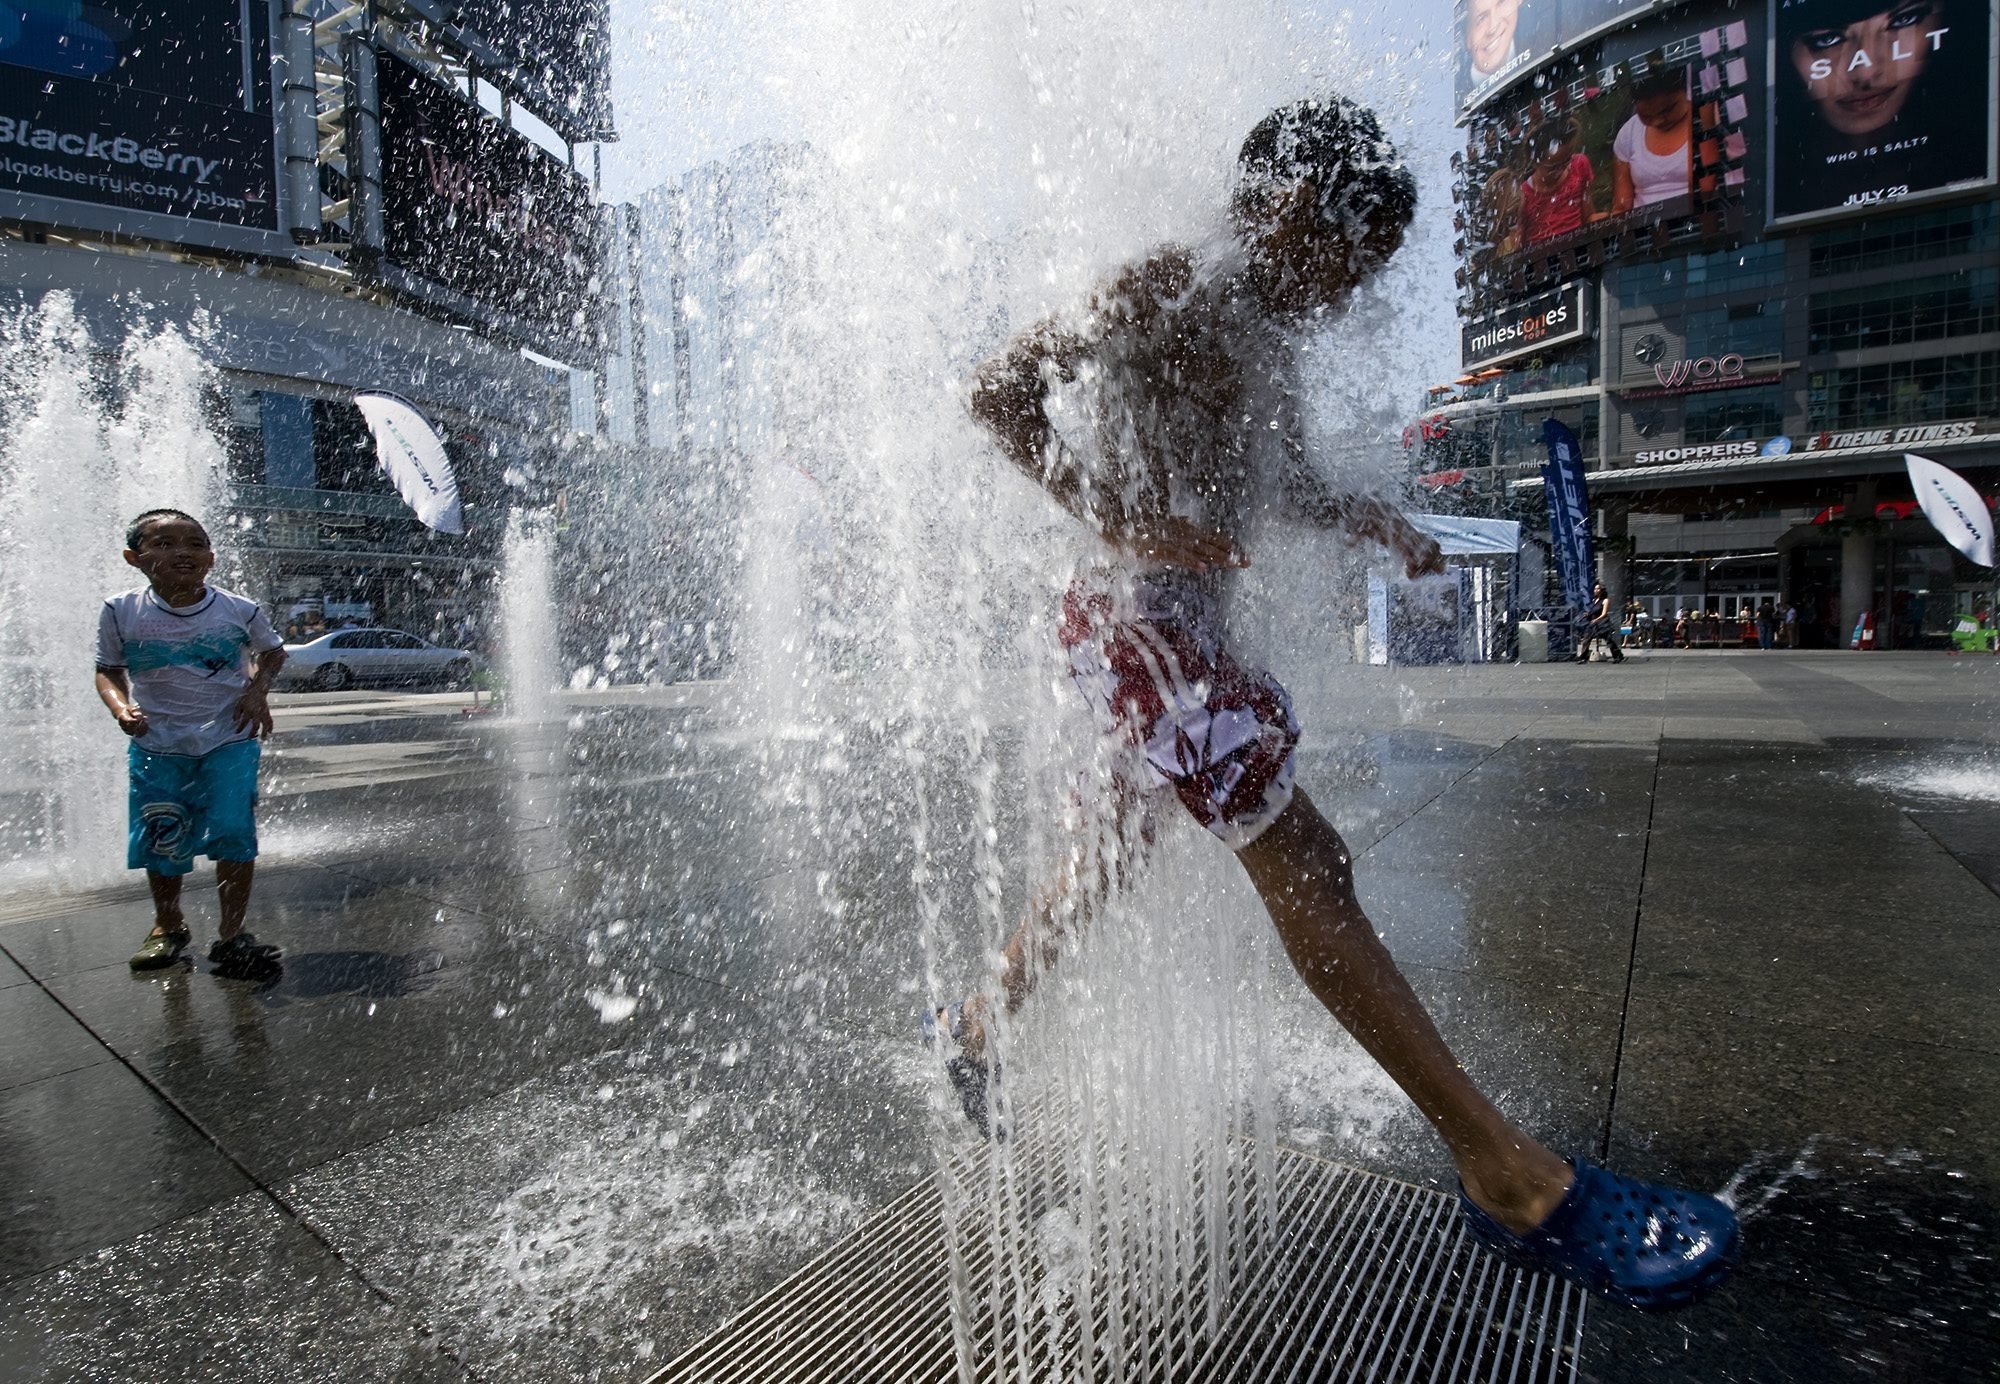 Ty Lewis, 8, right, and Ryan Chase, 7, cool off in the fountains at Dundas Square, as a heatwave strikes Toronto, Canada, July 8, 2010. (AP Photo)